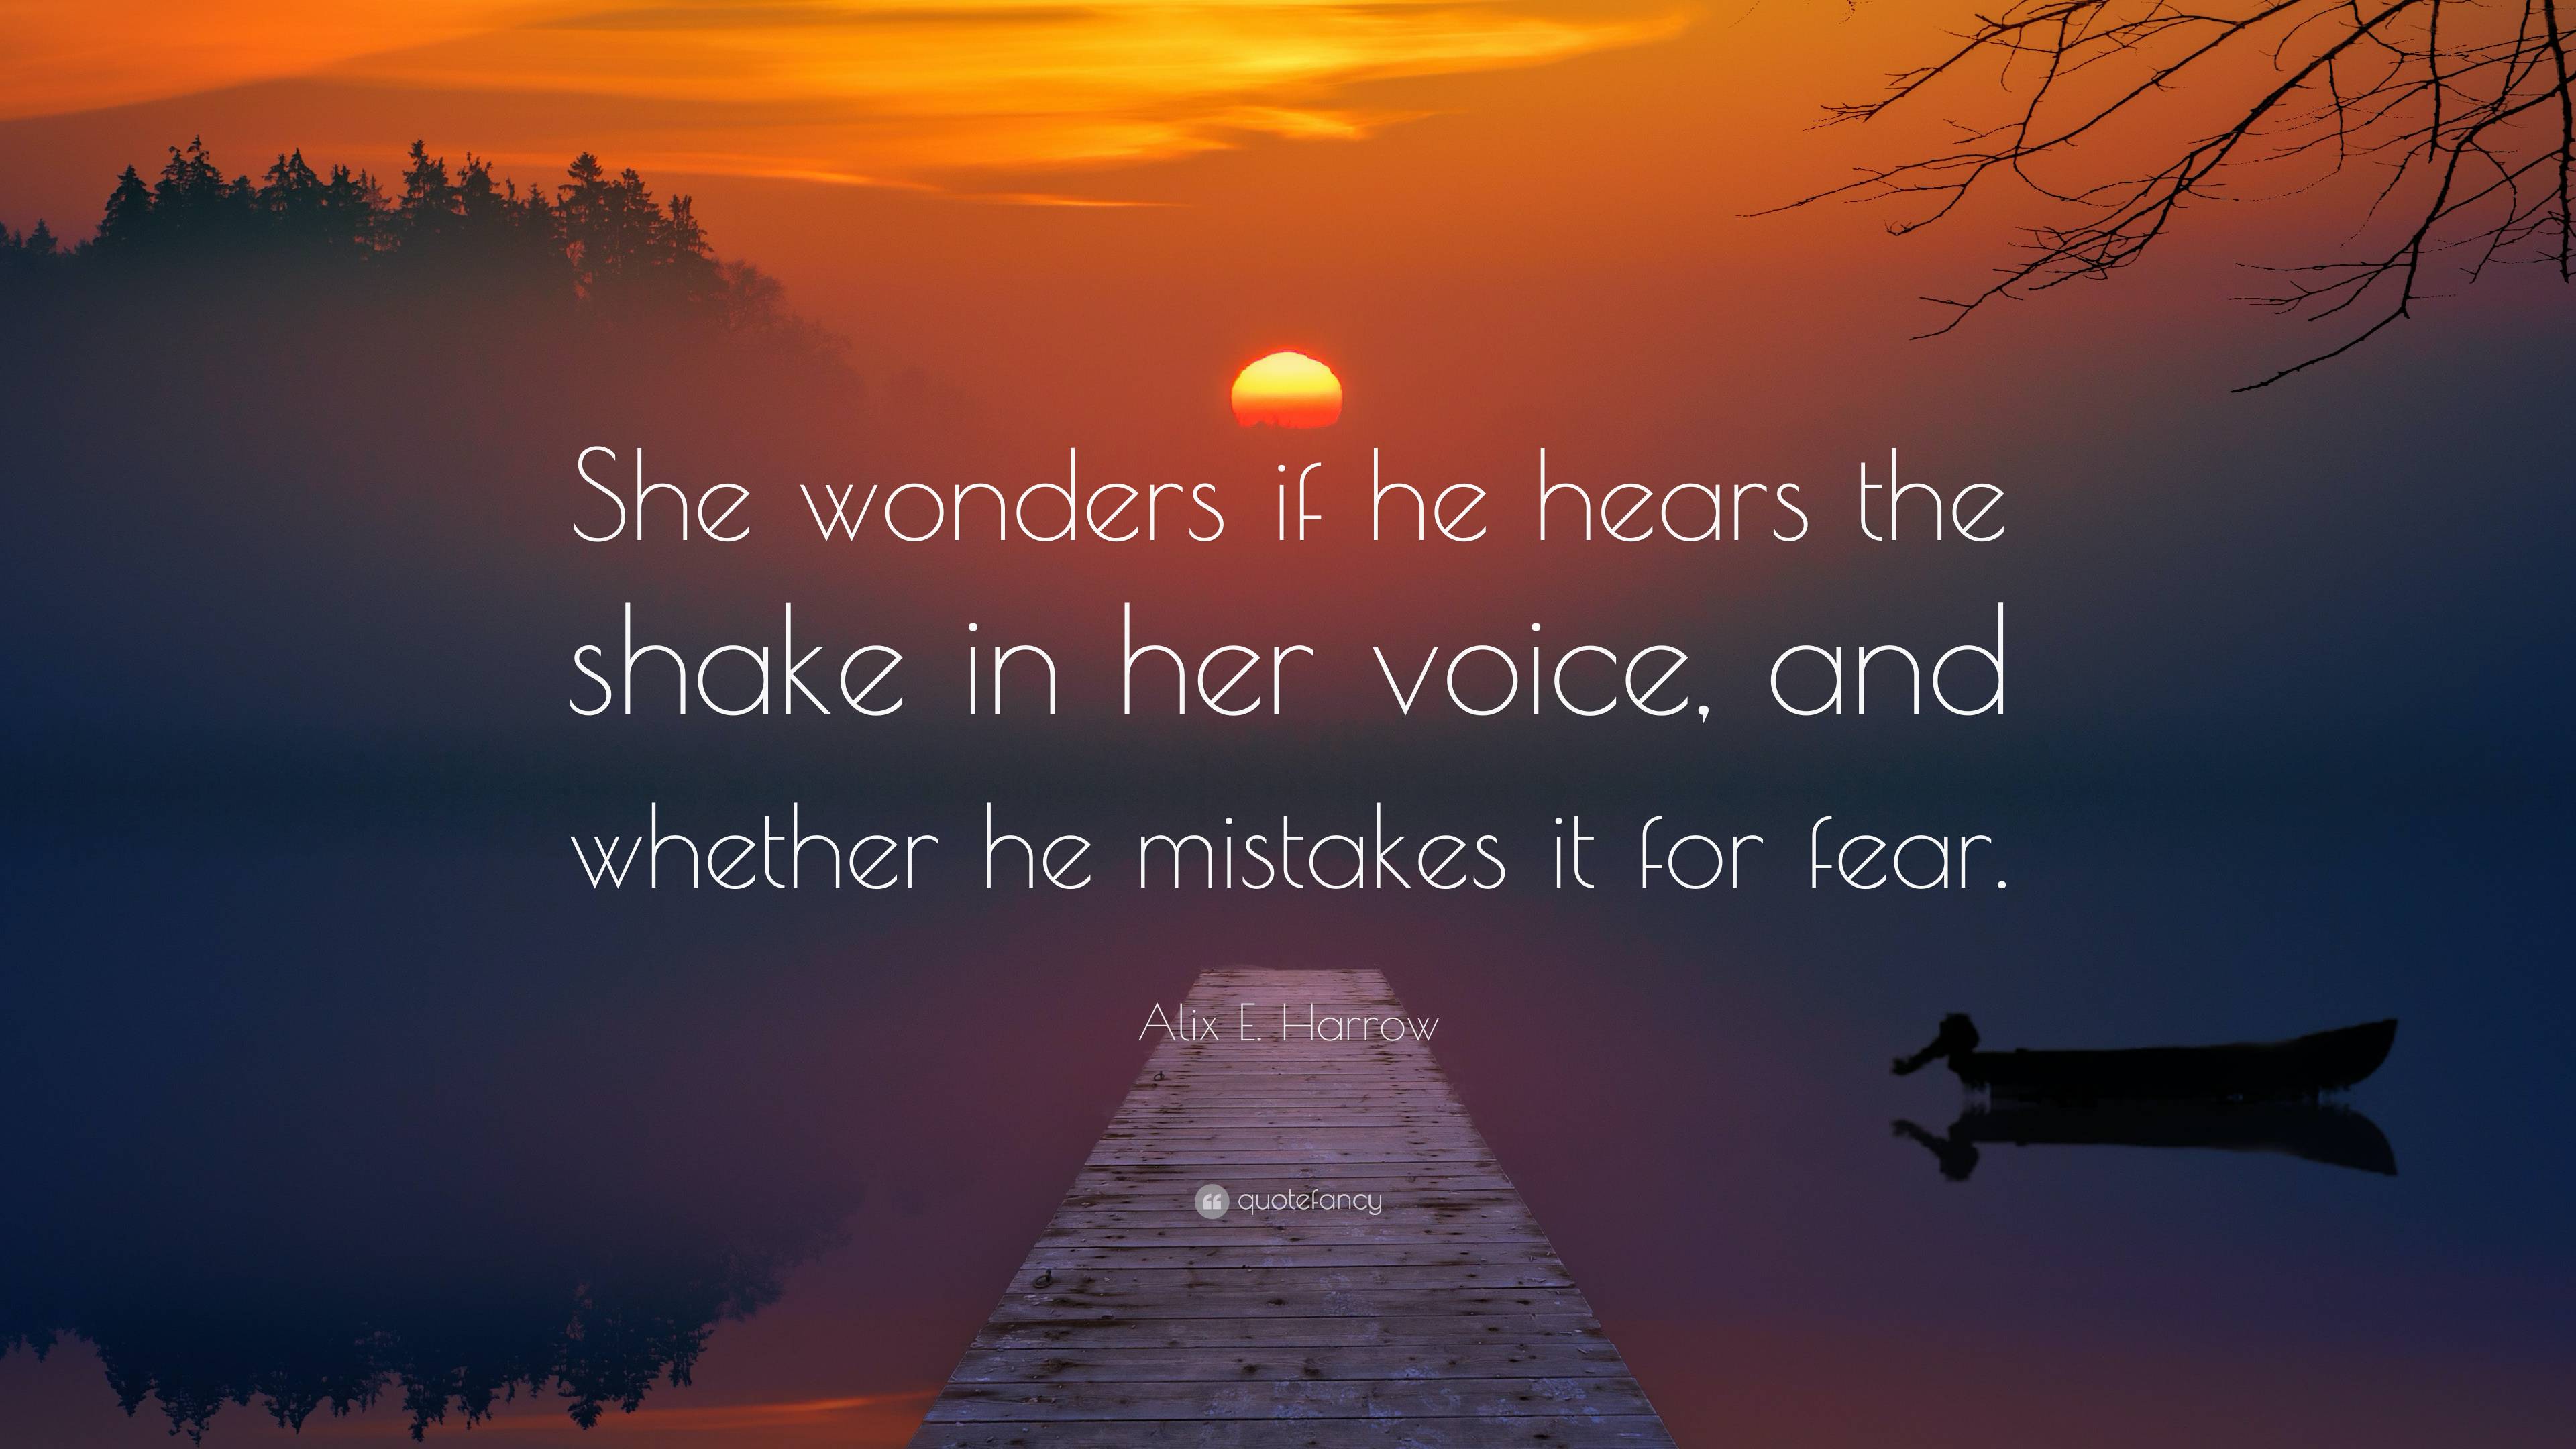 Alix E. Harrow Quote: “She wonders if he hears the shake in her voice ...